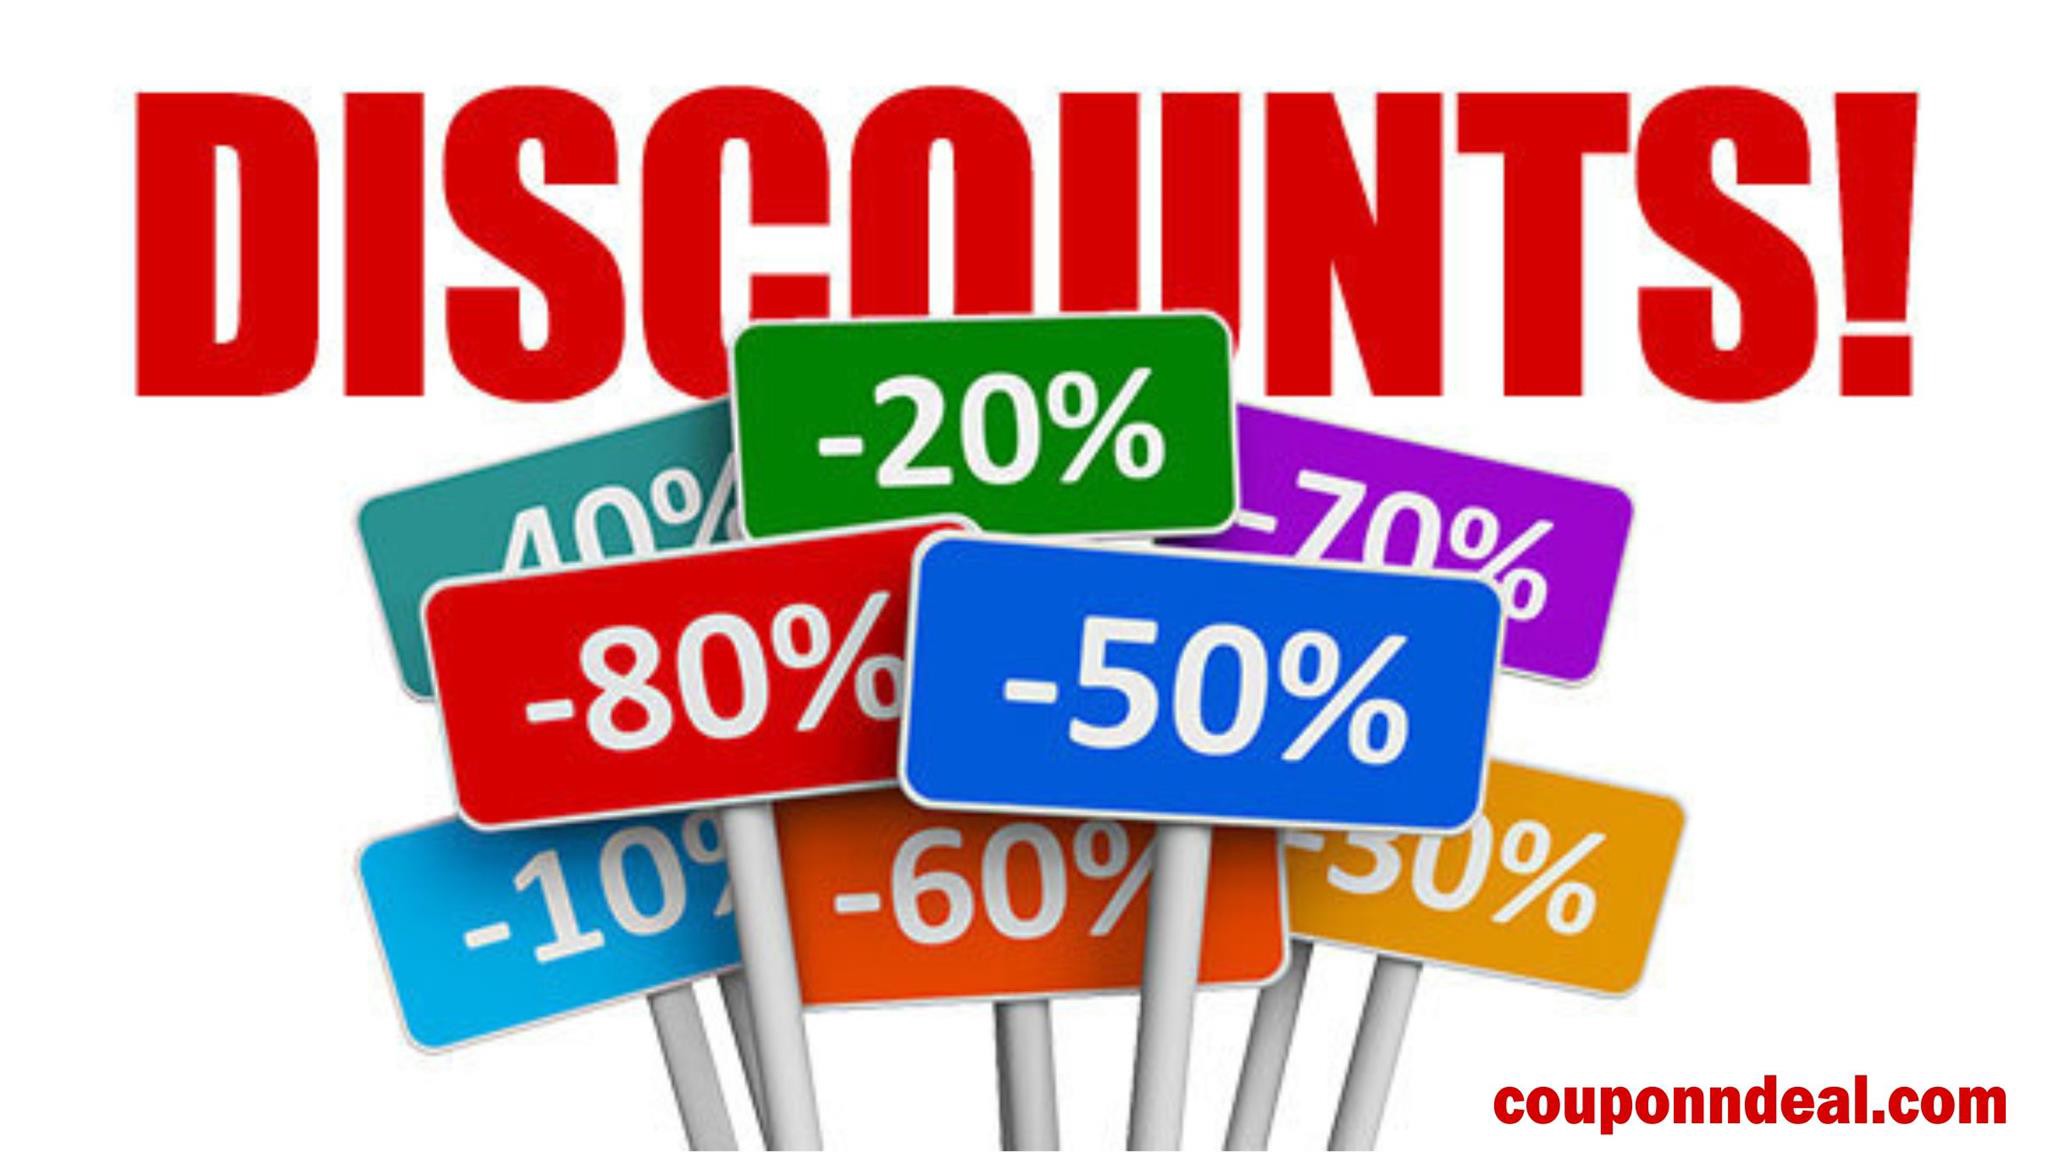 Discount Shopping Site: All the Client Needs to Know